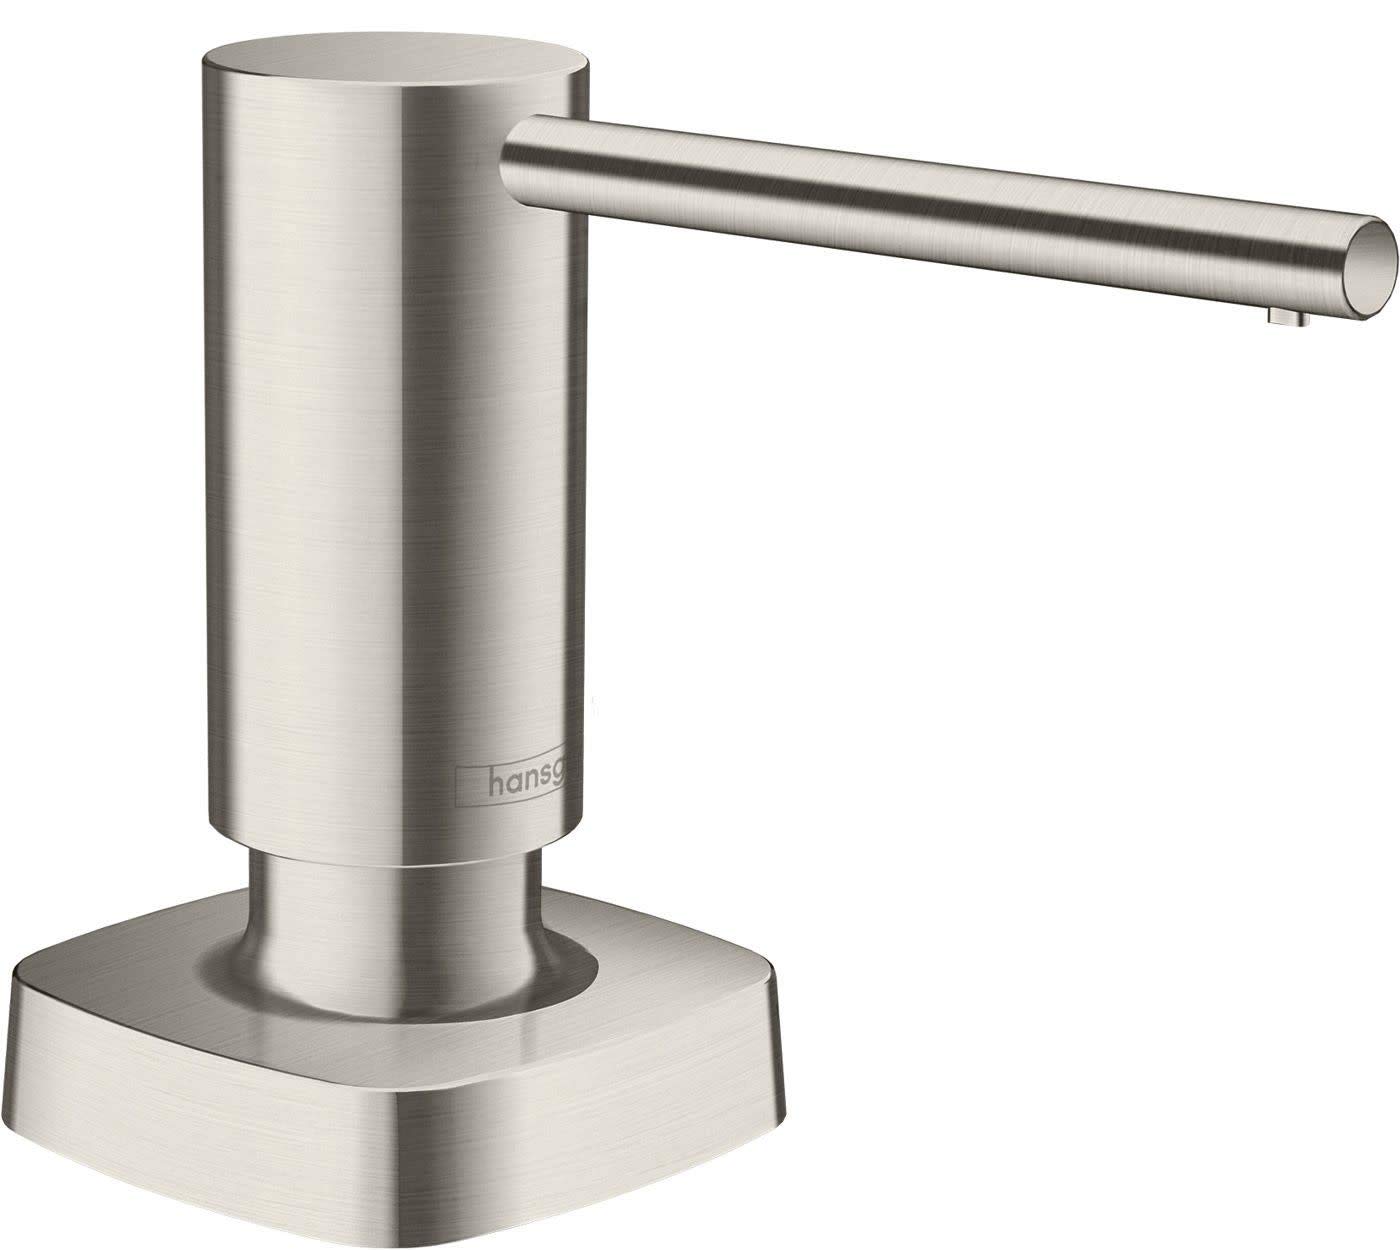 hansgrohe Bath and Kitchen Sink Soap Dispenser, Metris 4-inch, Modern Soap Dispenser in Stainless Steel Optic, 40468801